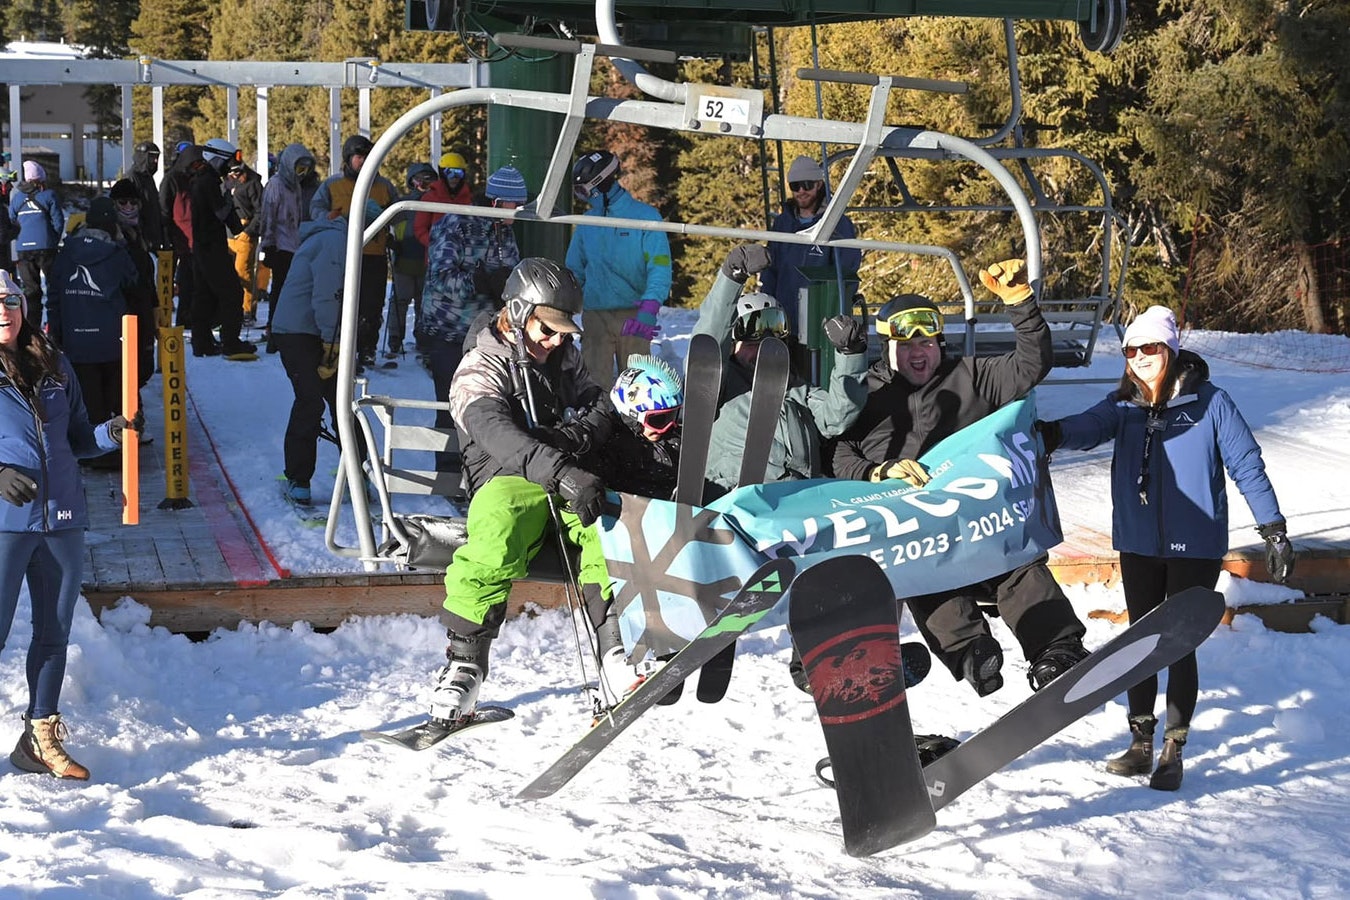 The first lift of skiers is welcomed at the top of the run at Grand Targhee last weekend.